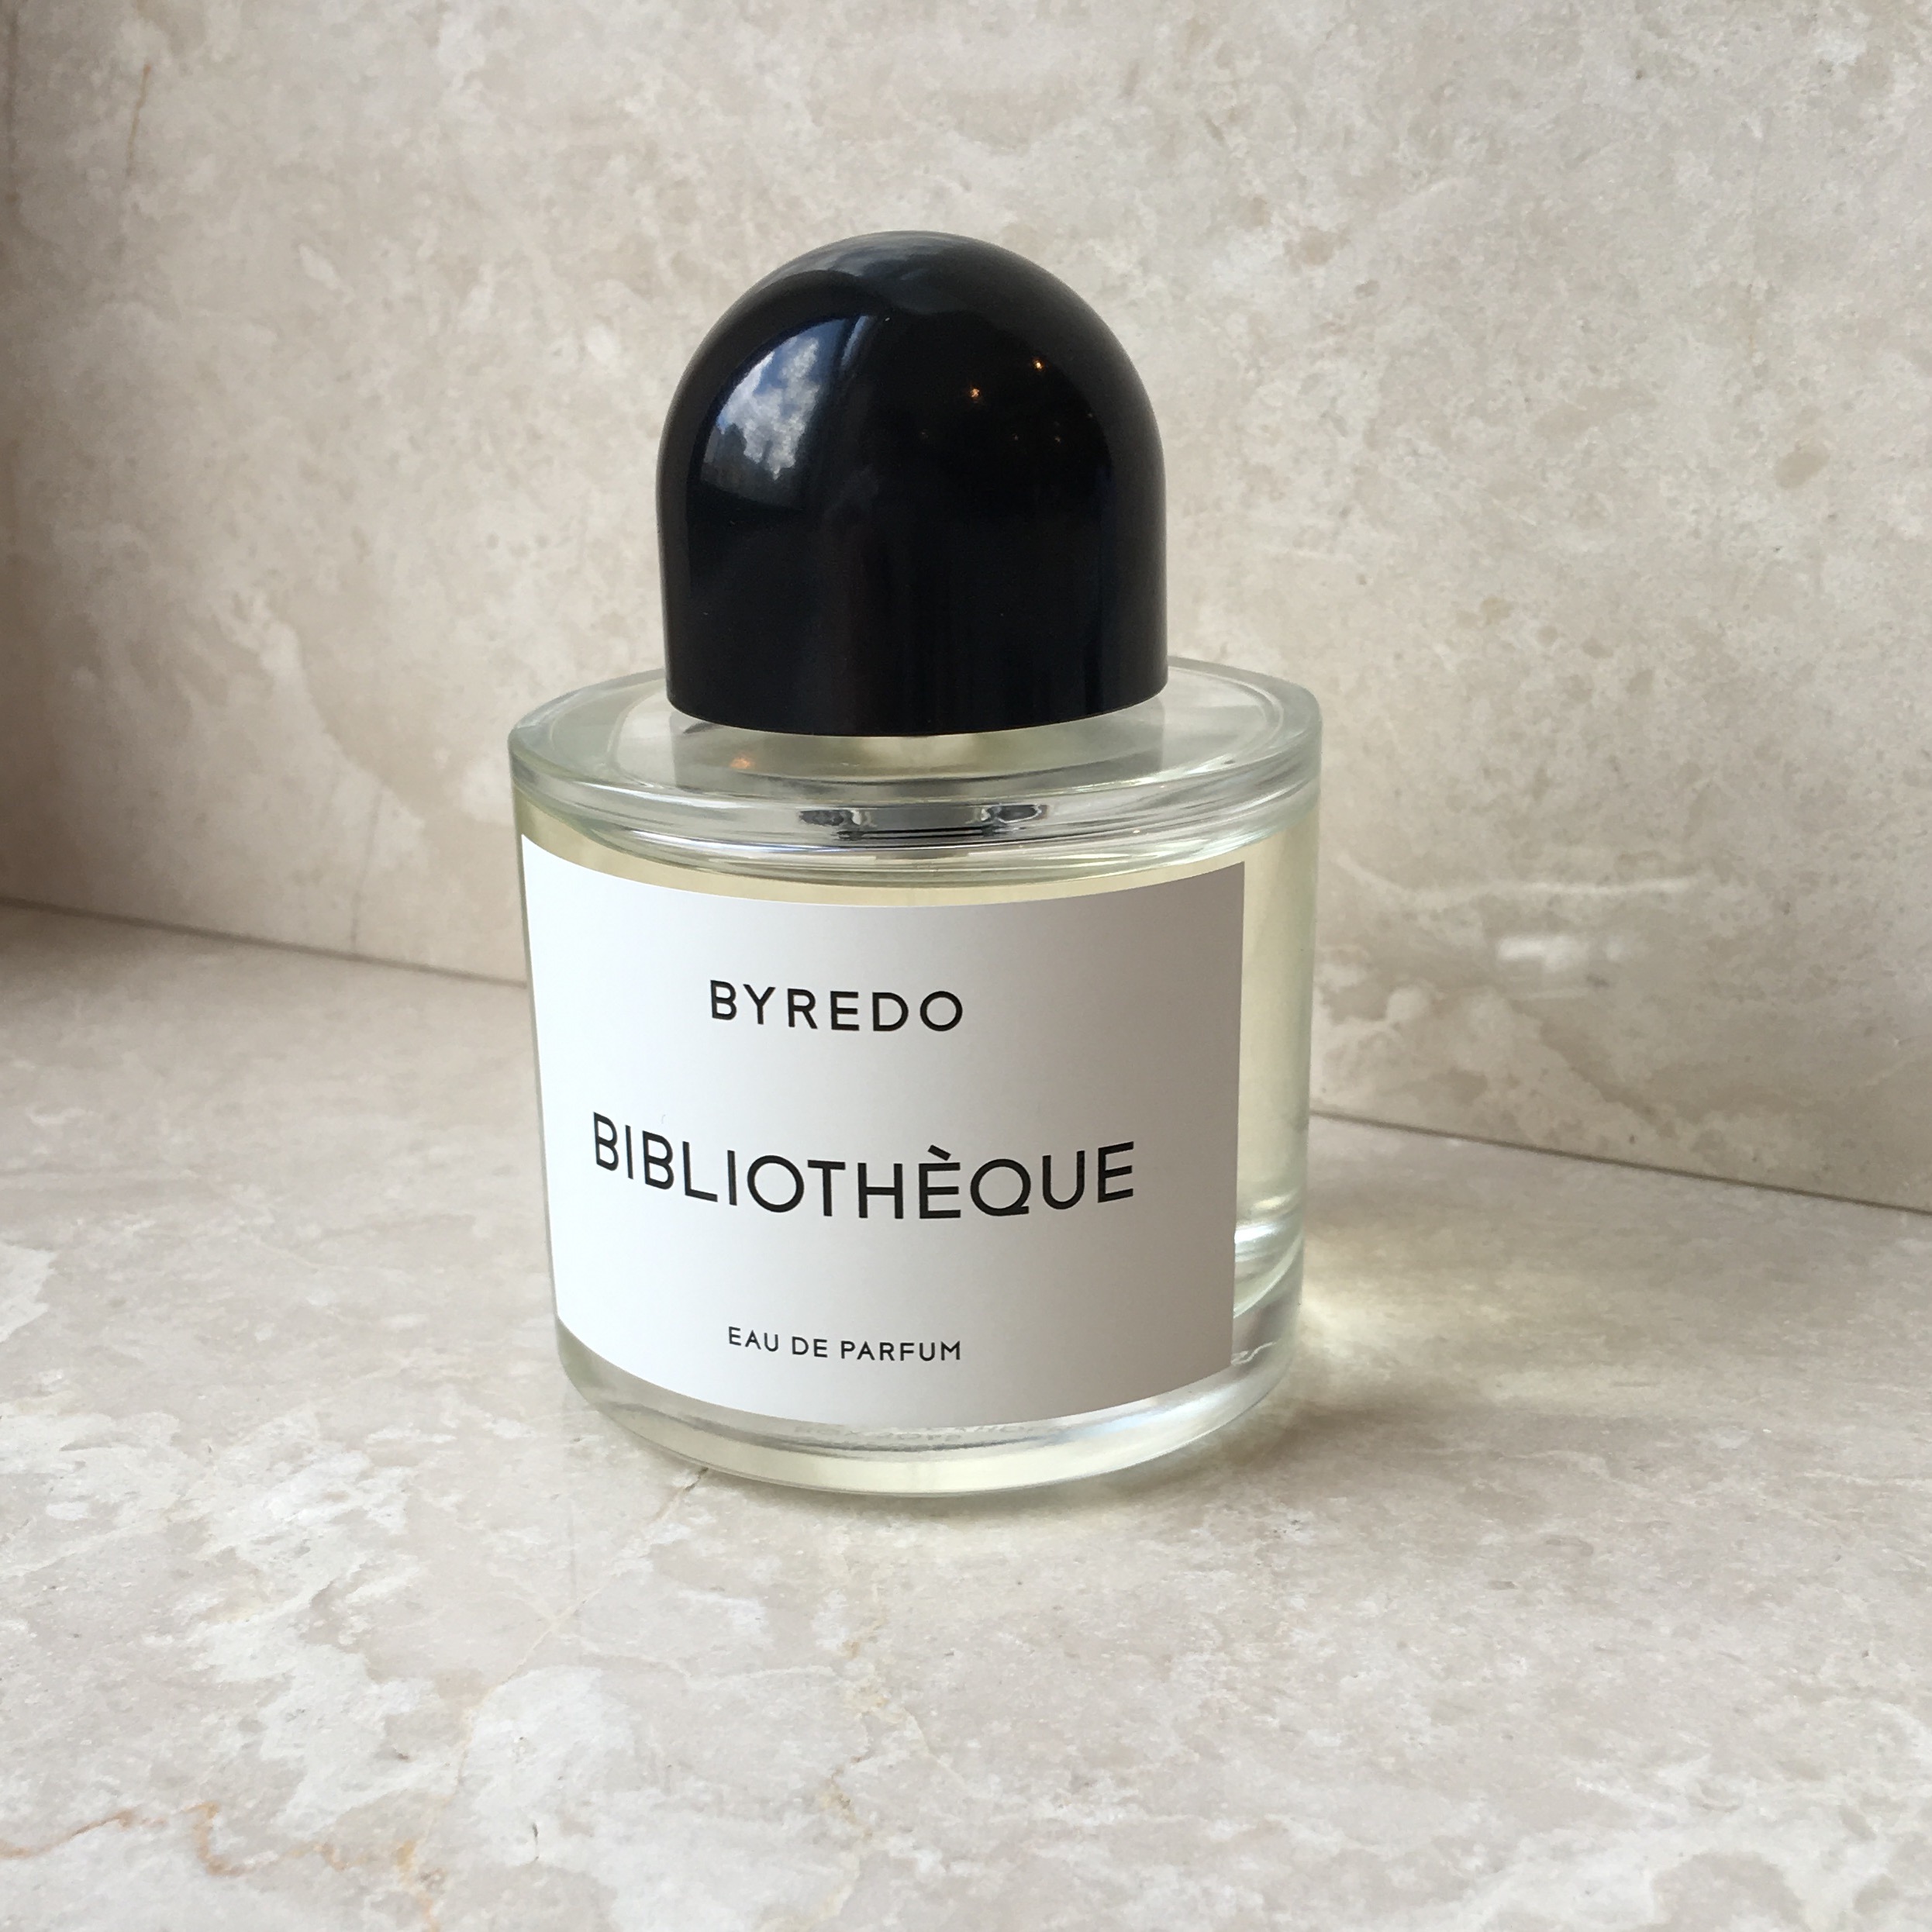 Byredo's Bibliotheque Is Now A Limited-Edition | Into The Gloss